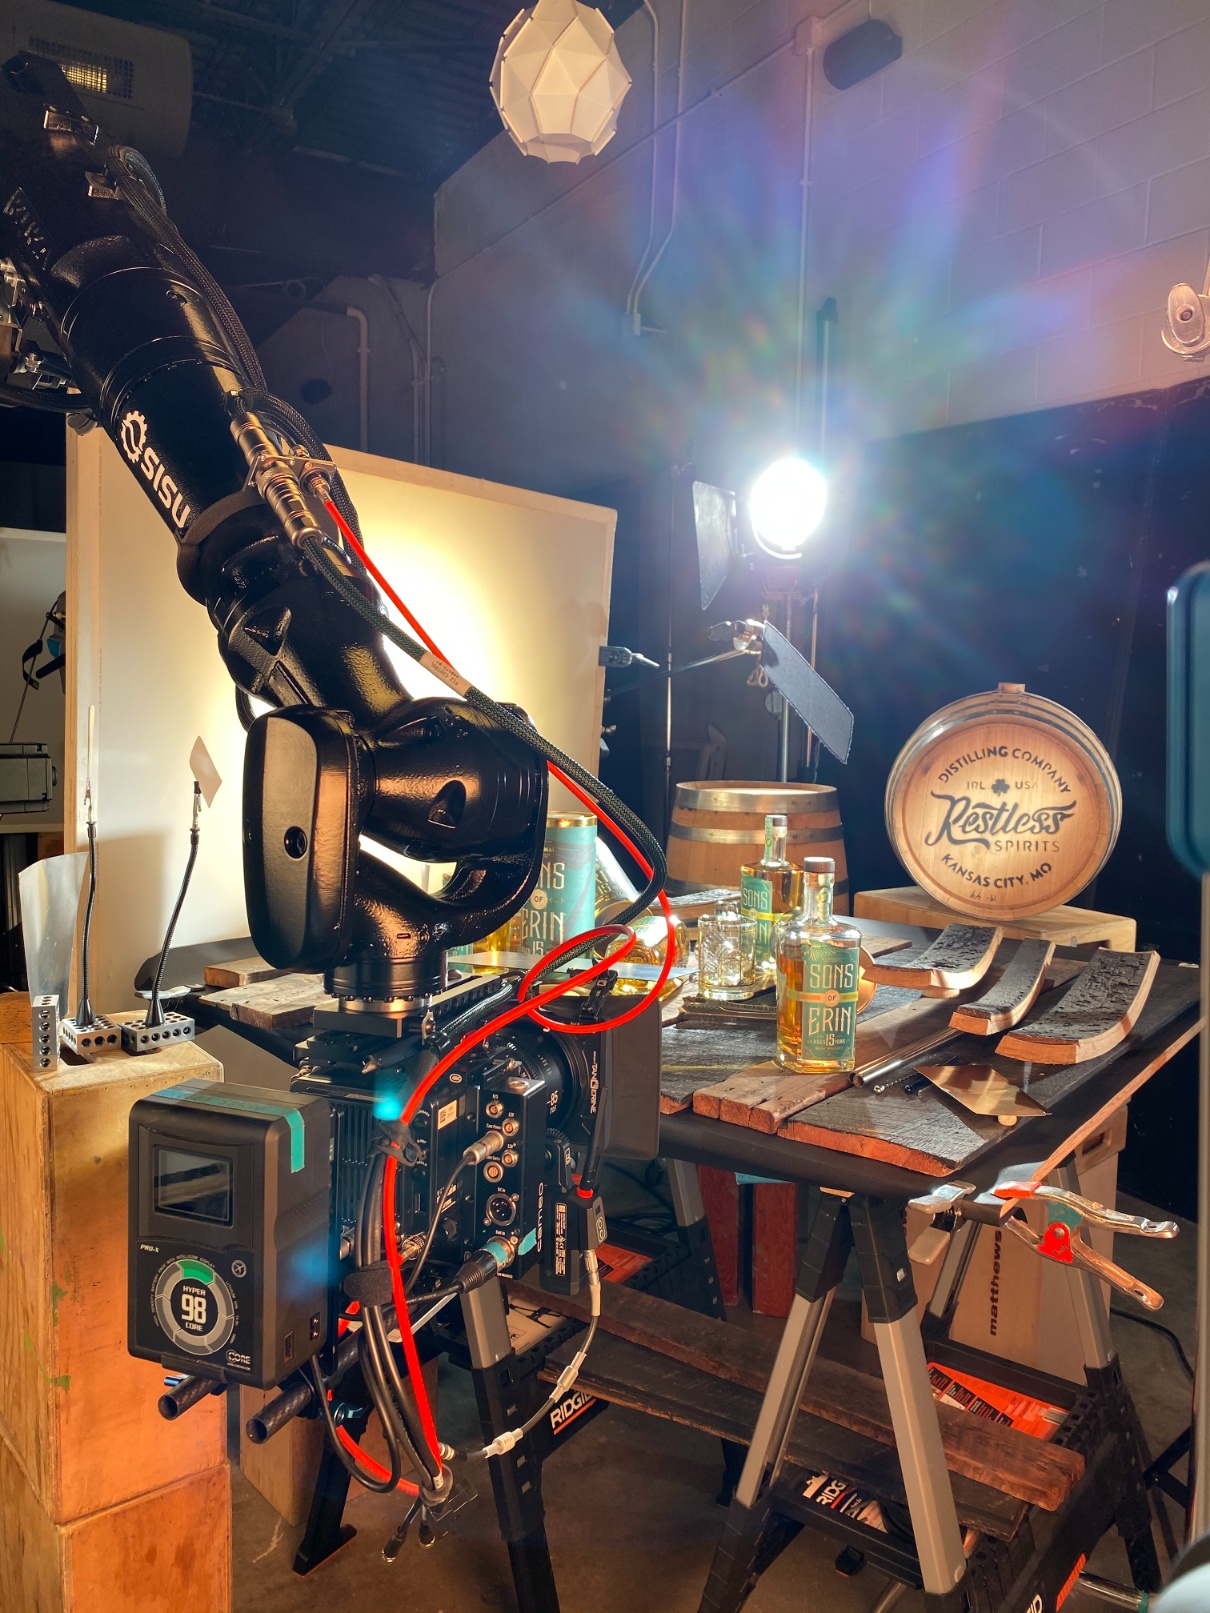 SISU C20 robot behind the scenes in our studio 8183 Productions